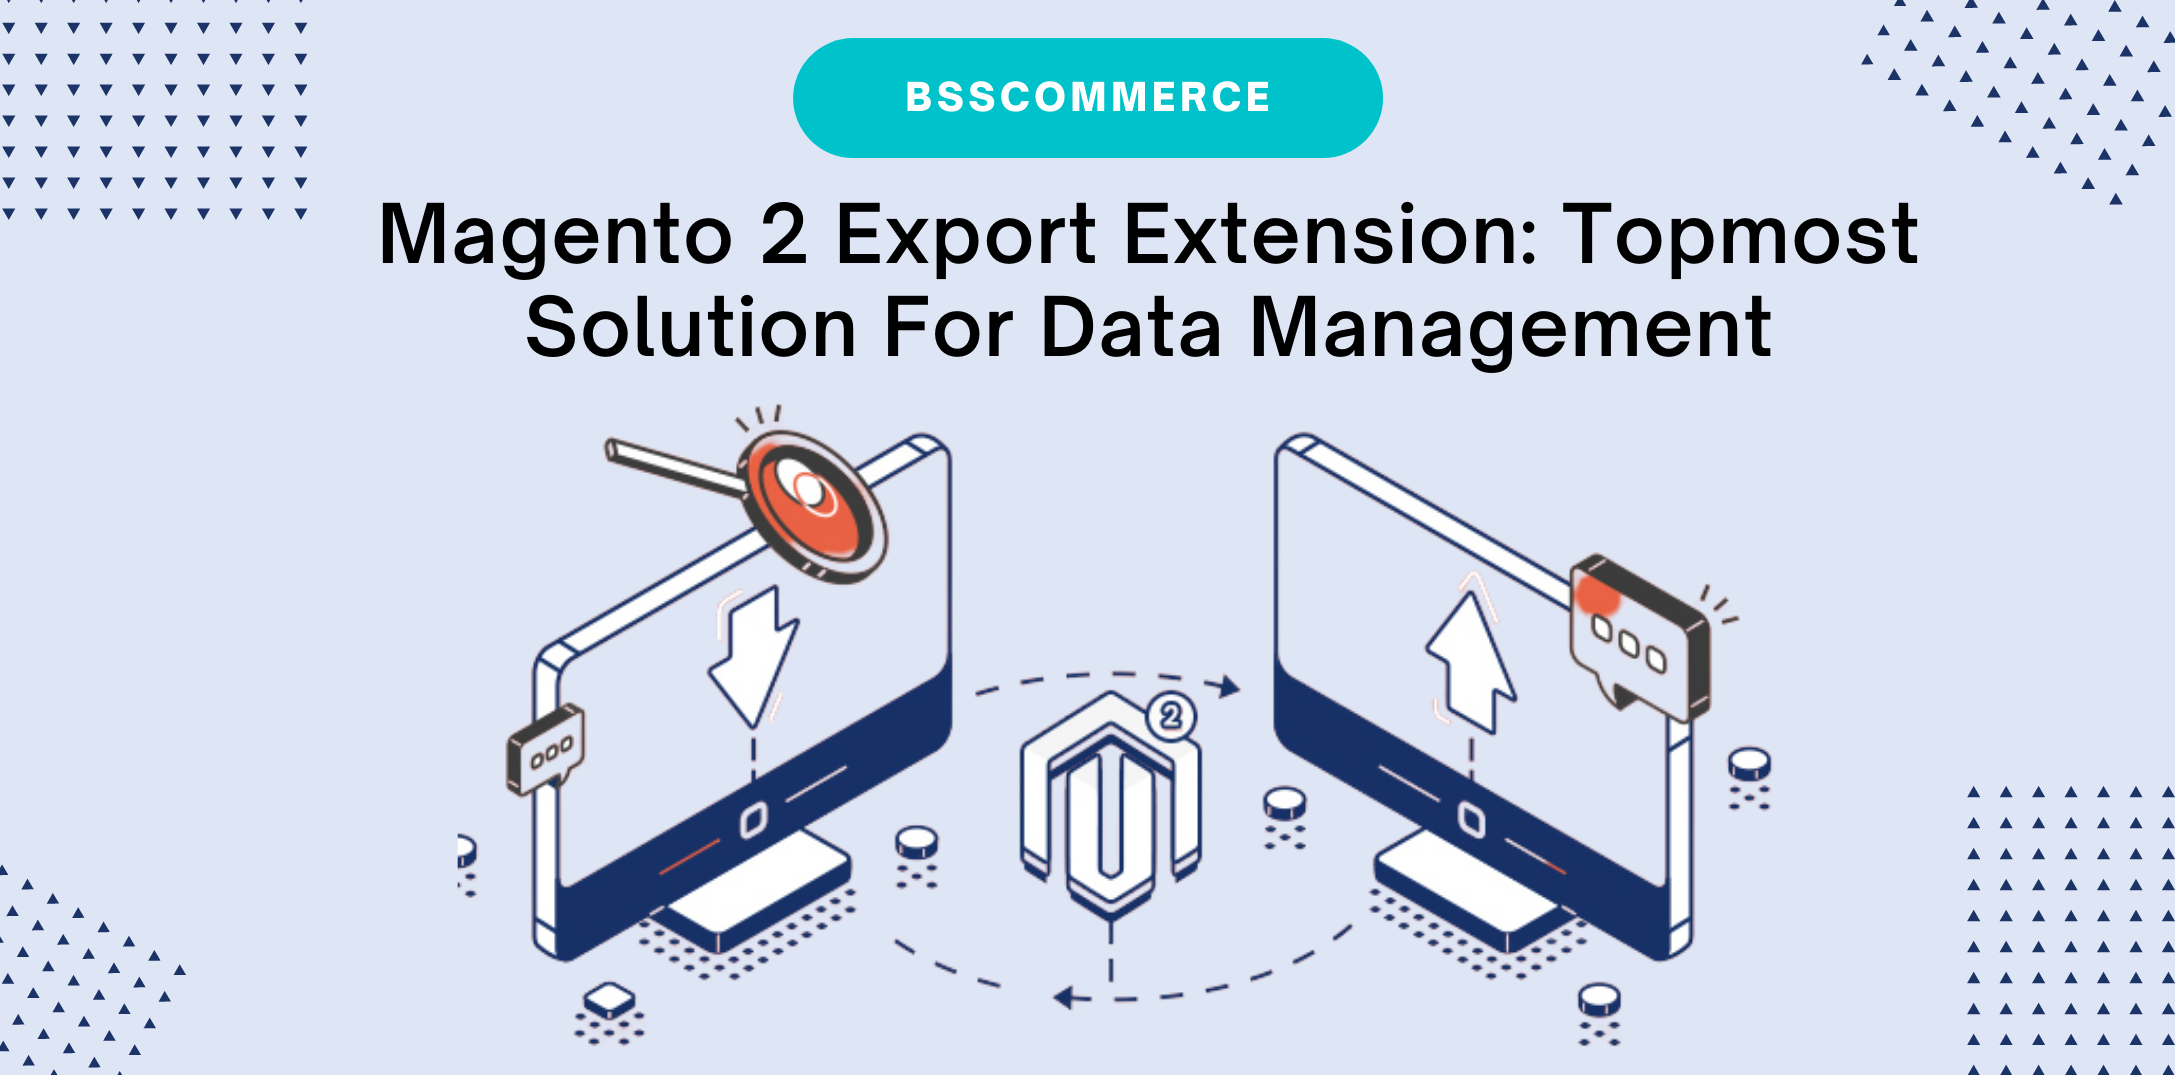 Magento 2 Export Extension Topmost Solution For Data Management